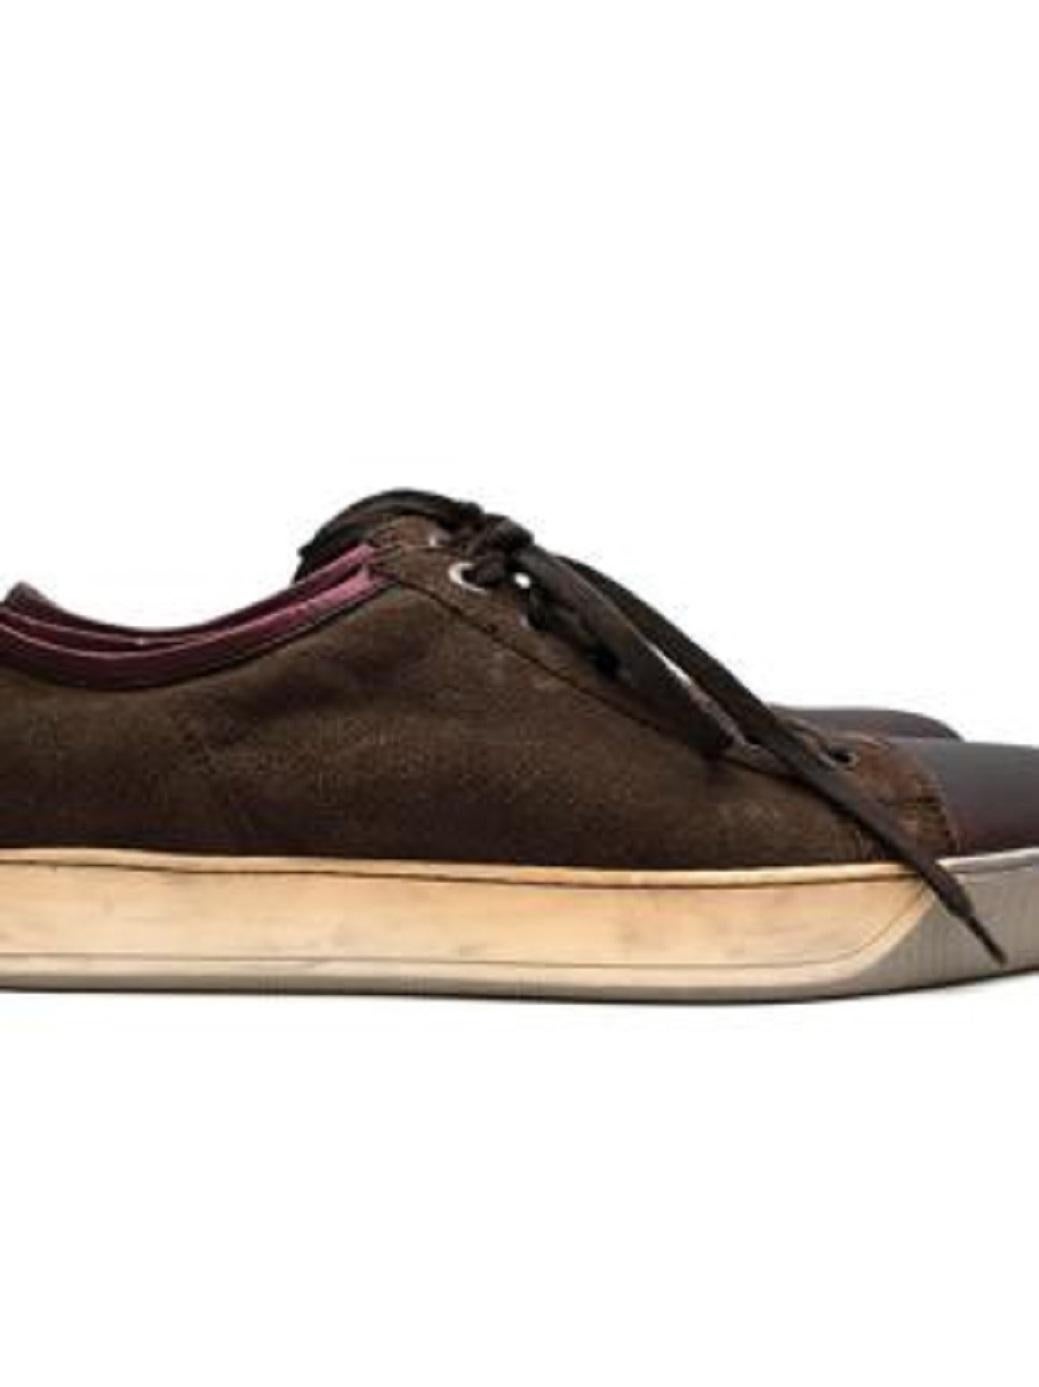 Lanvin Brown Suede Sneakers 

-Soft suede texture 
-Luxurious soft leather lining
-Gorgeous metallic burgundy details
-Aged effect rubber soles for adherence 
-Lace-up fastening to the front 
 
Materials:

Main suede 
Lining- leather 
Soles- rubber 